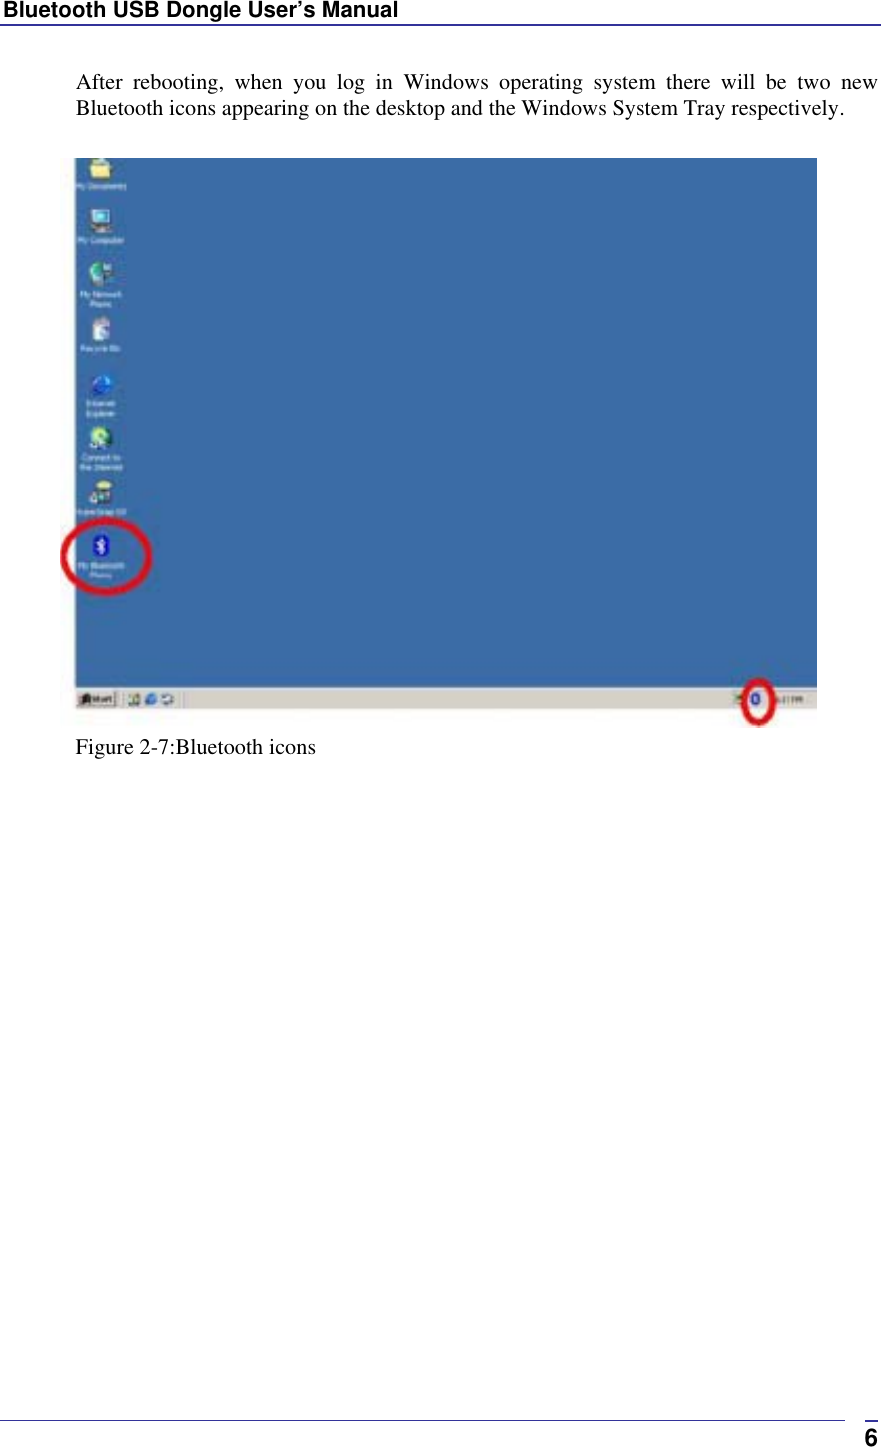 Bluetooth USB Dongle User’s Manual  6After rebooting, when you log in Windows operating system there will be two new Bluetooth icons appearing on the desktop and the Windows System Tray respectively.   Figure 2-7:Bluetooth icons   